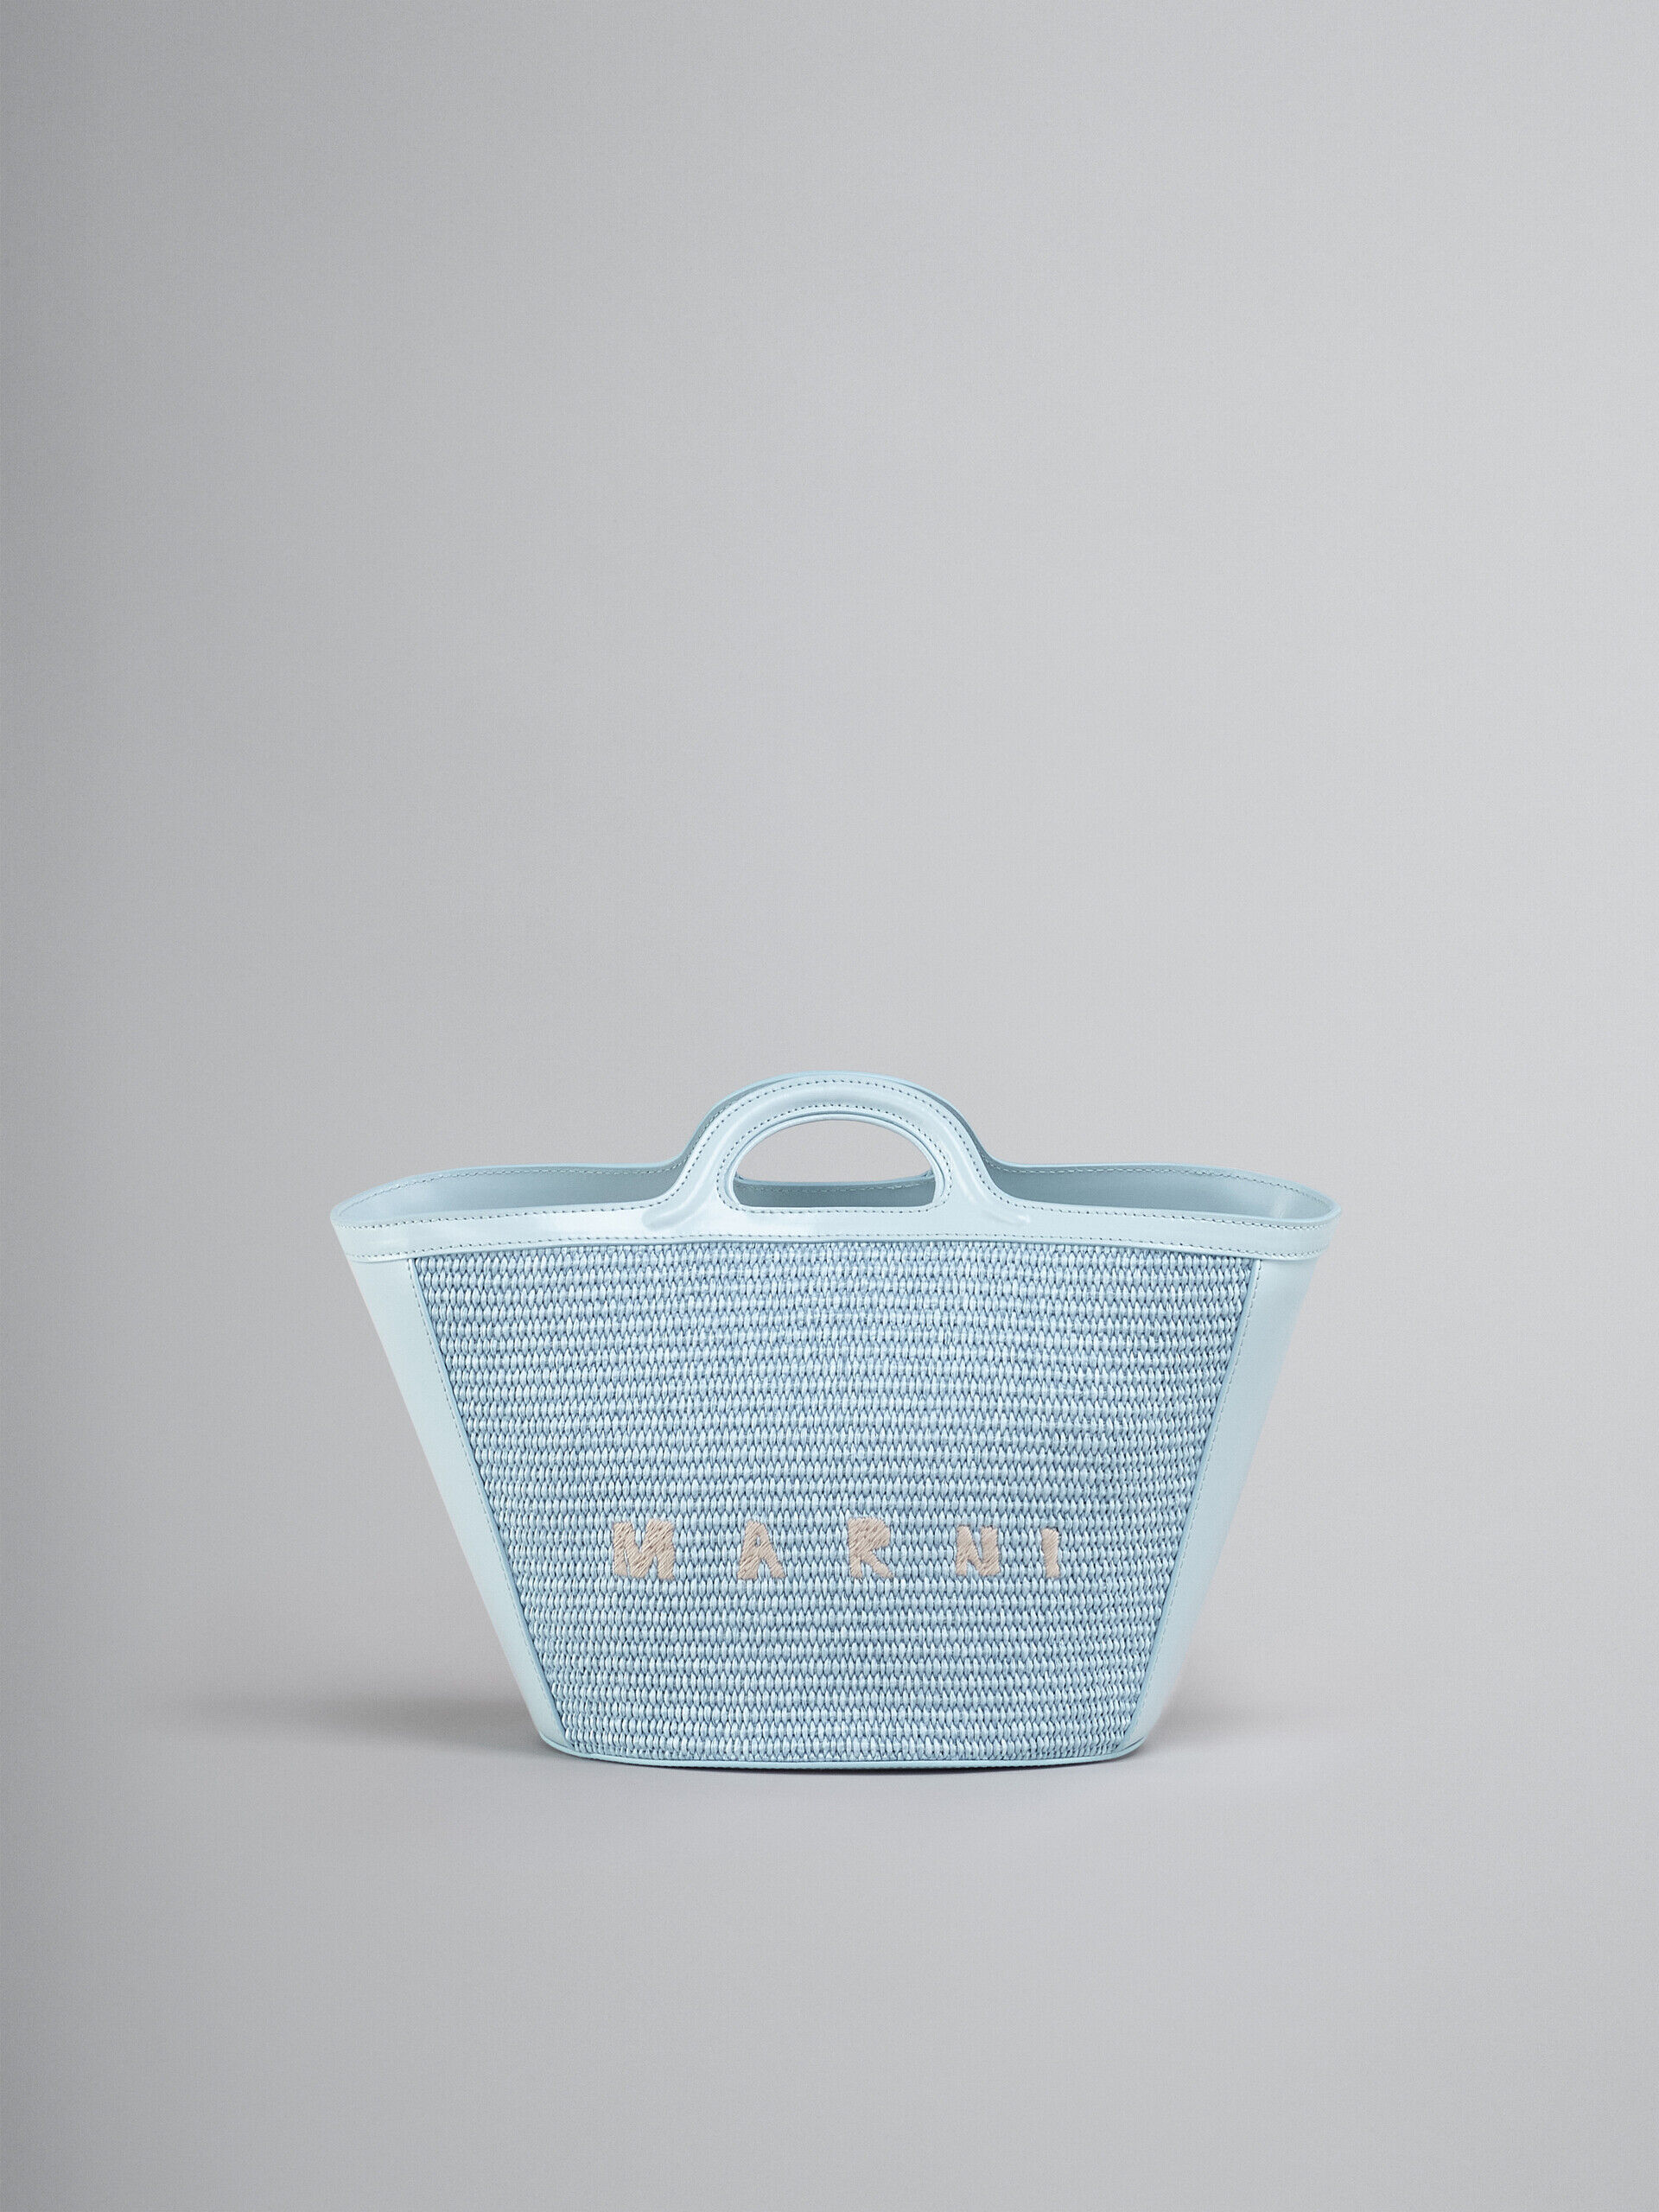 Tropicalia Small Bag in light blue leather and raffia-effect